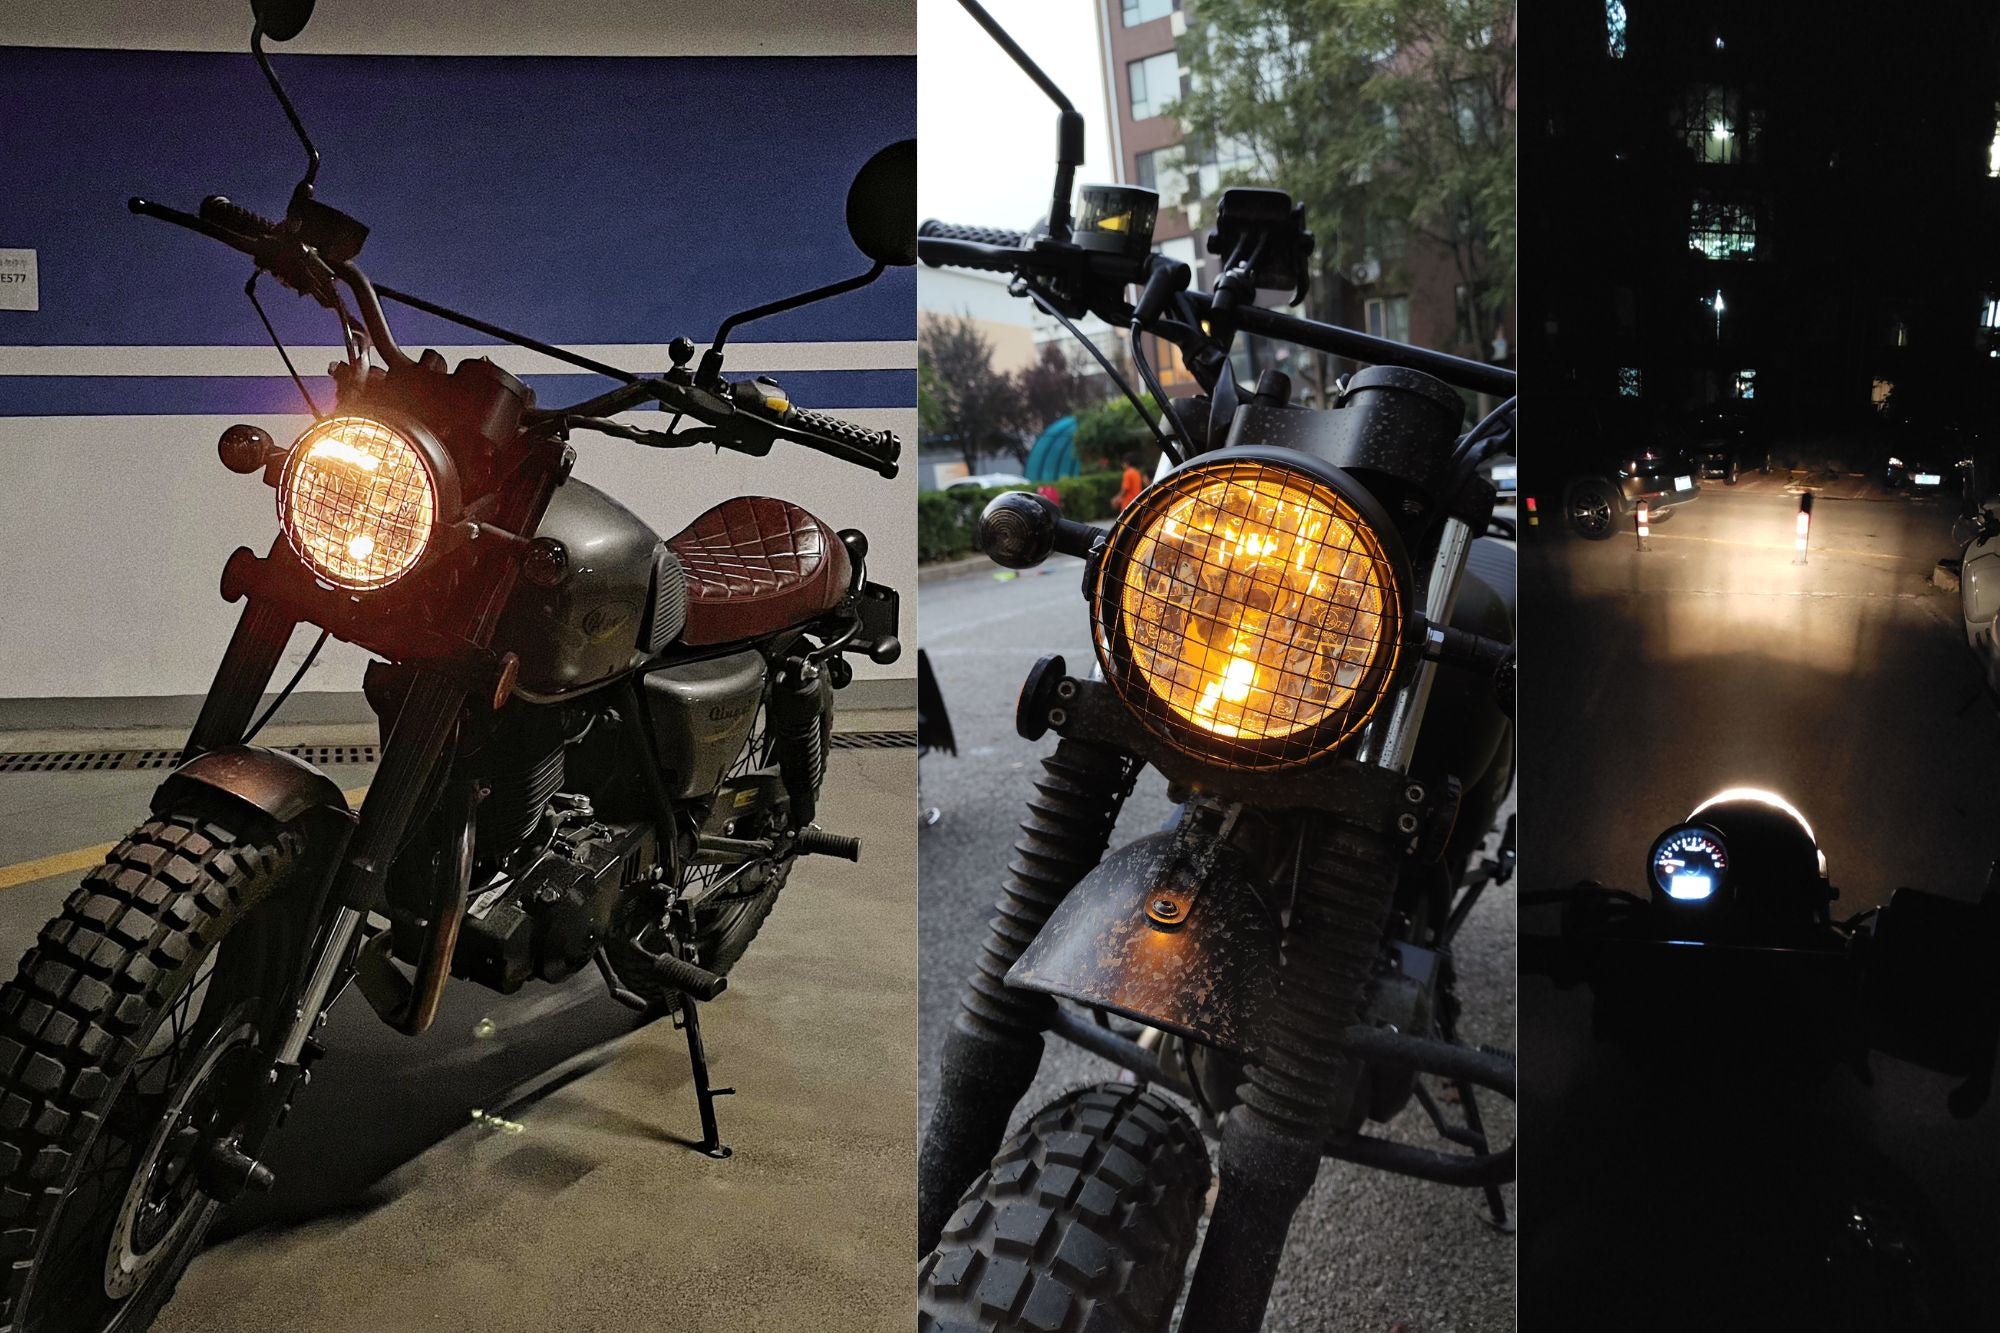 Scrambled headlight approved with grid